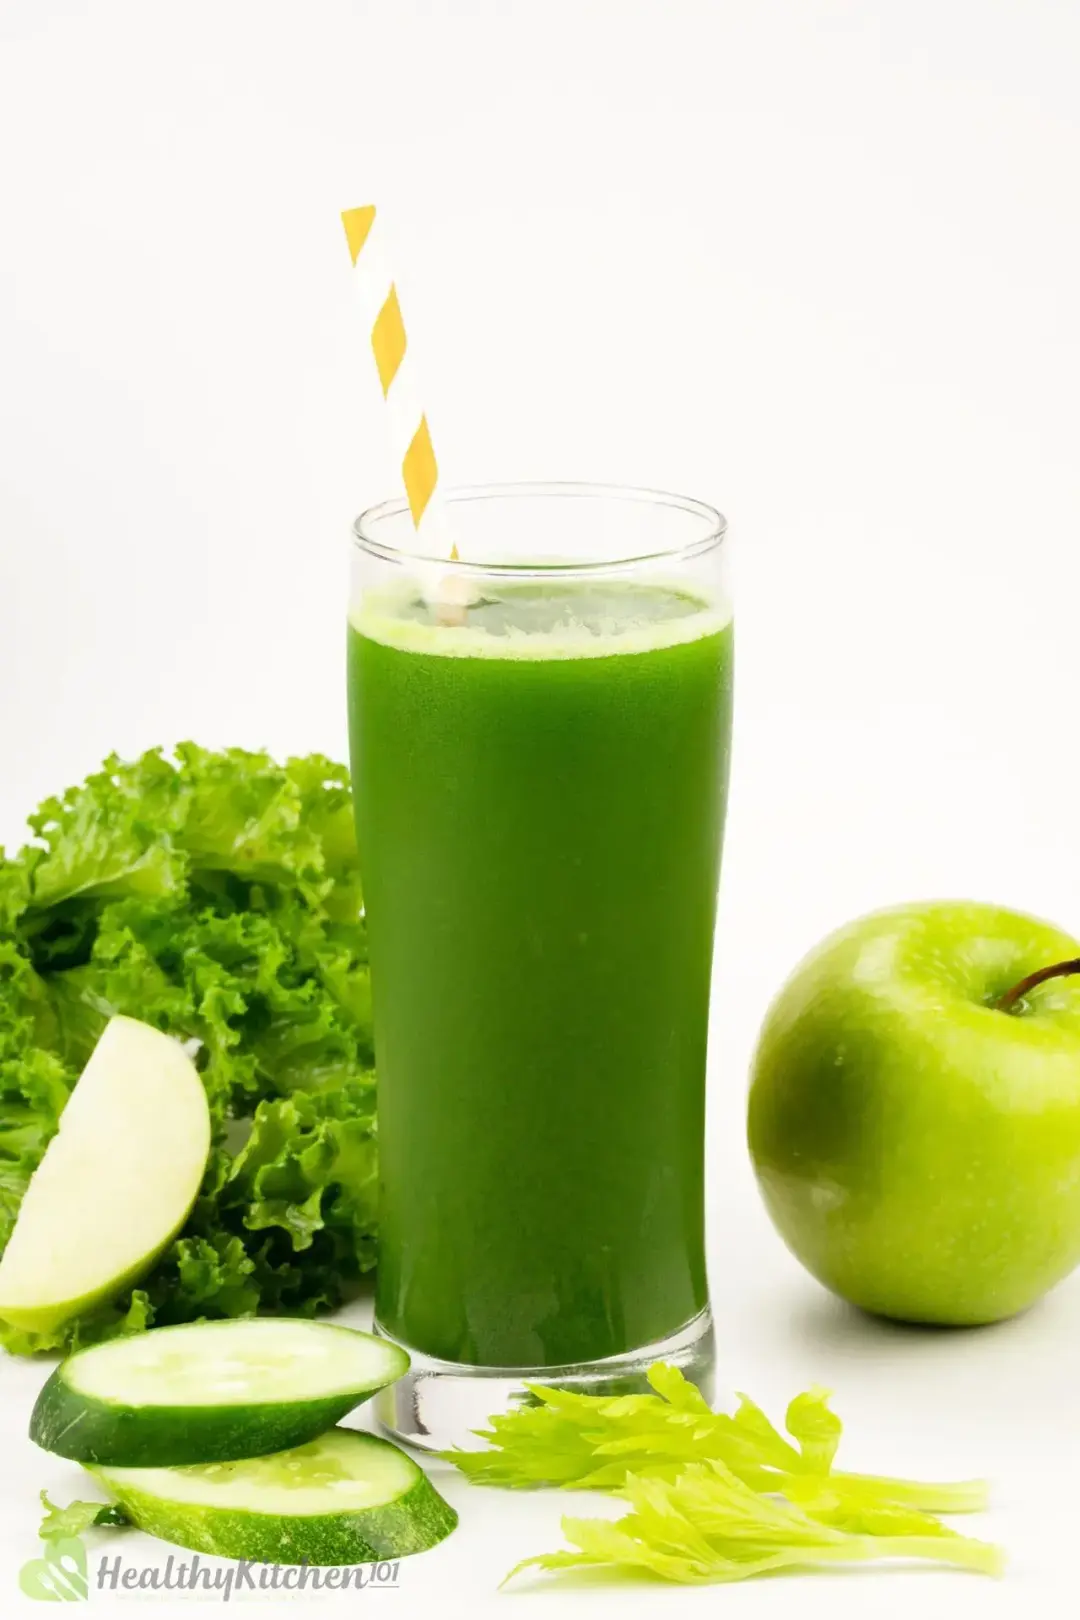 A cool glass of green vegetable juice, with an orange-striped straw centering decorants: a whole green apple, thick slices of cucumber, and some green leaves